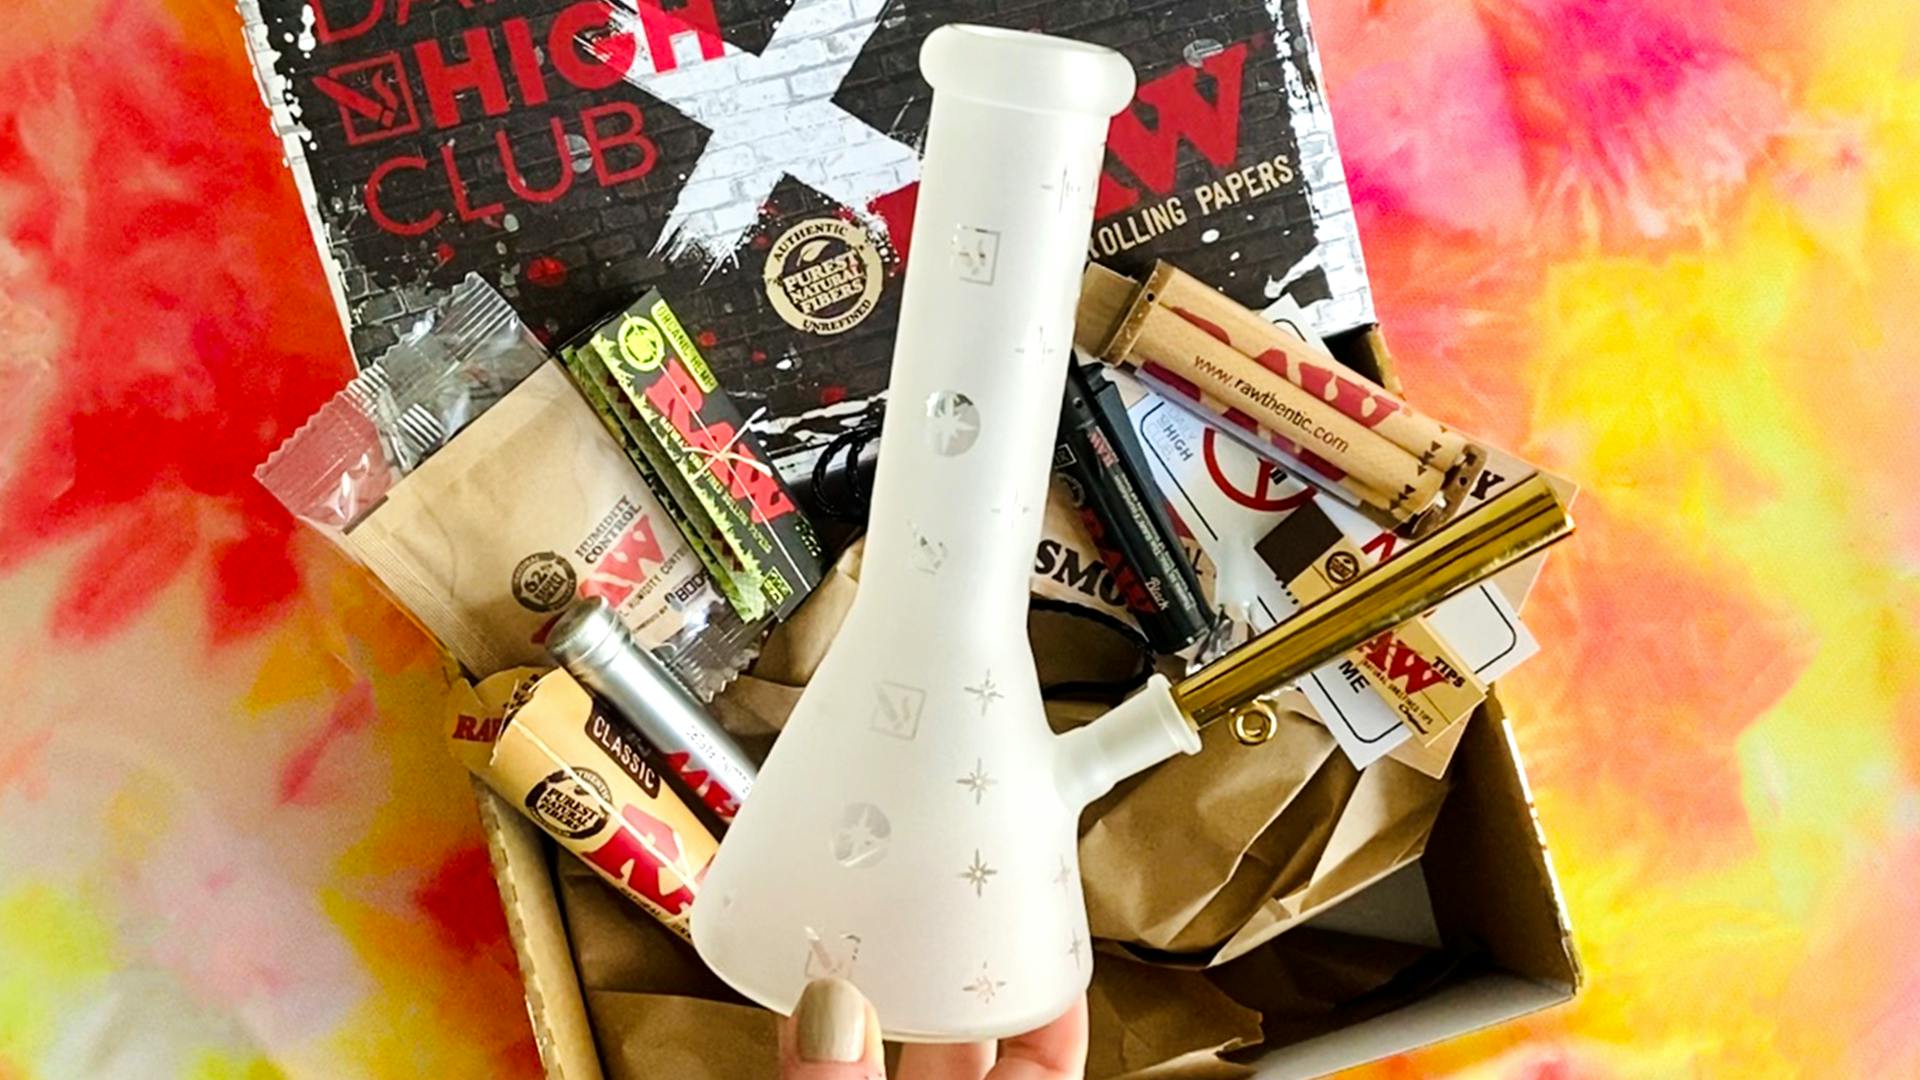 Daily High Club Most popular smoking subscription box! Leafly